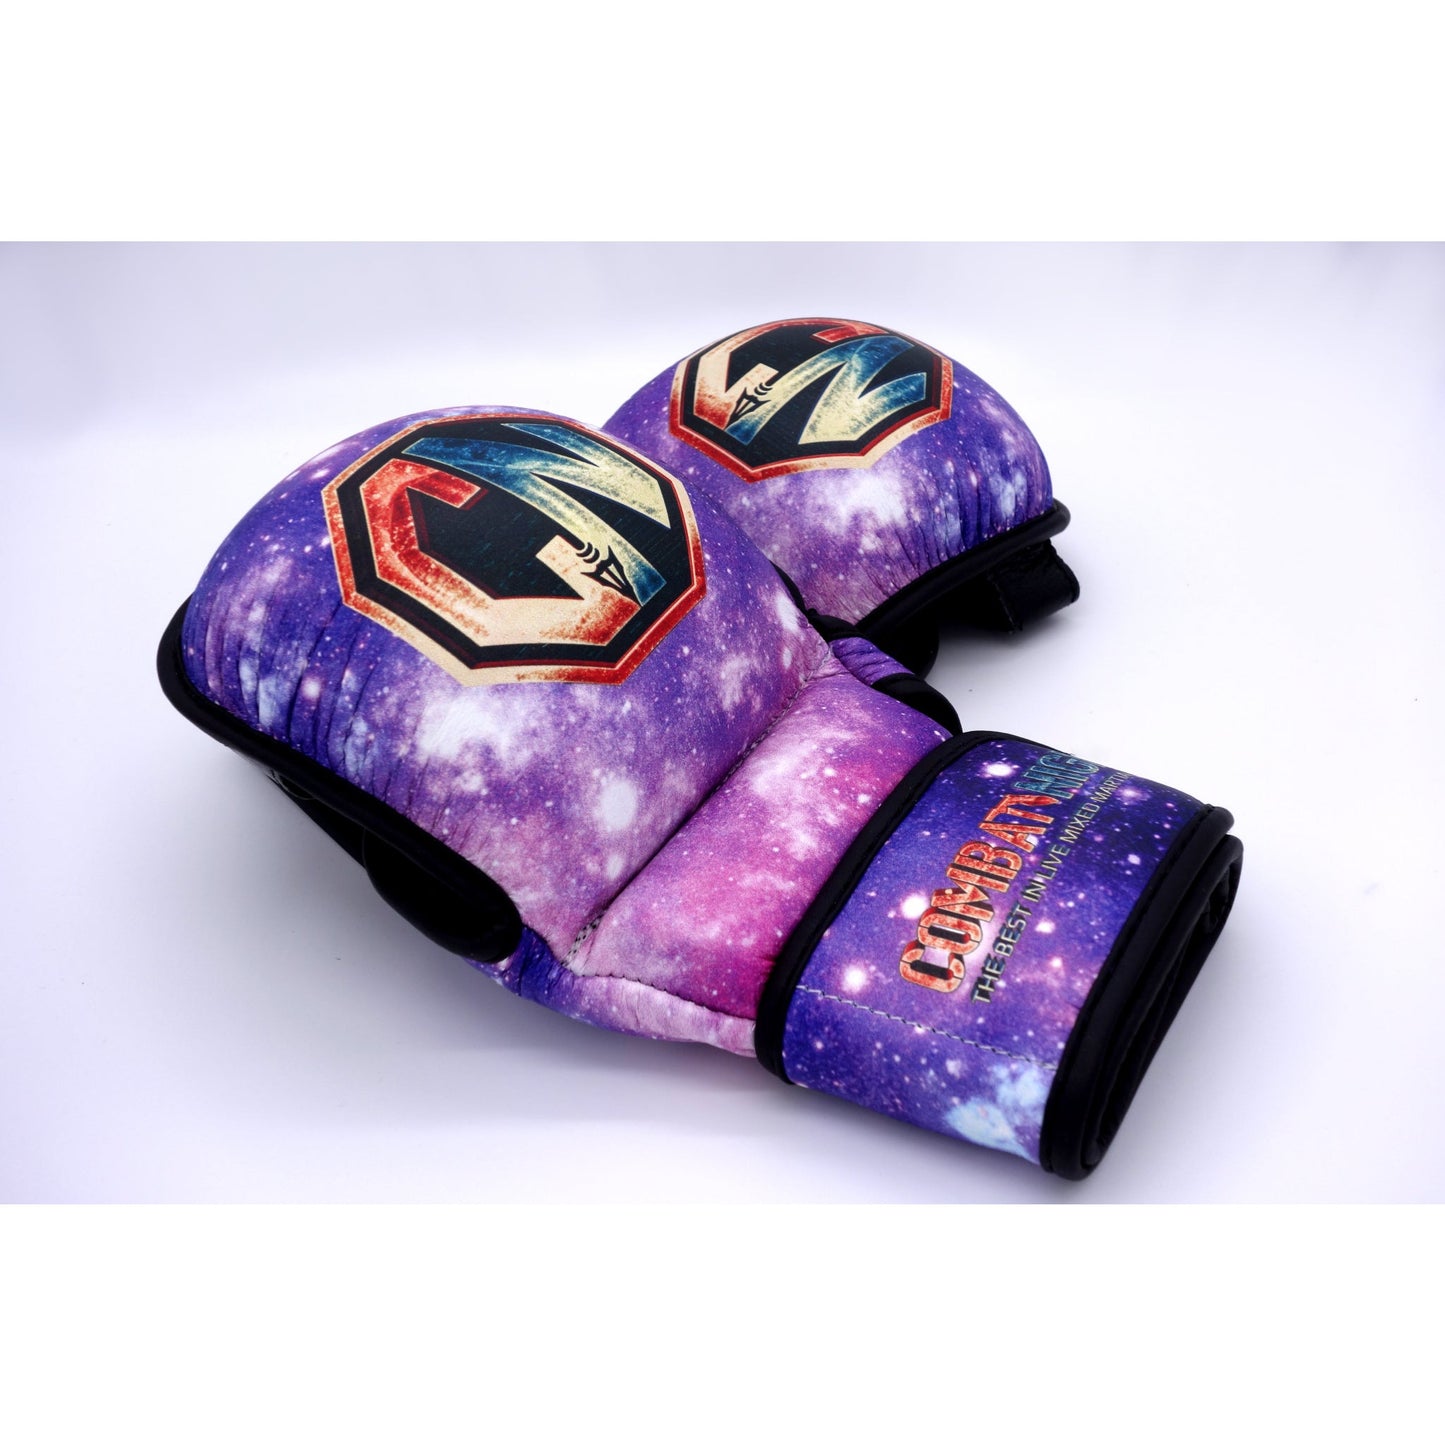 Combat Night Galaxy Sparring Gloves